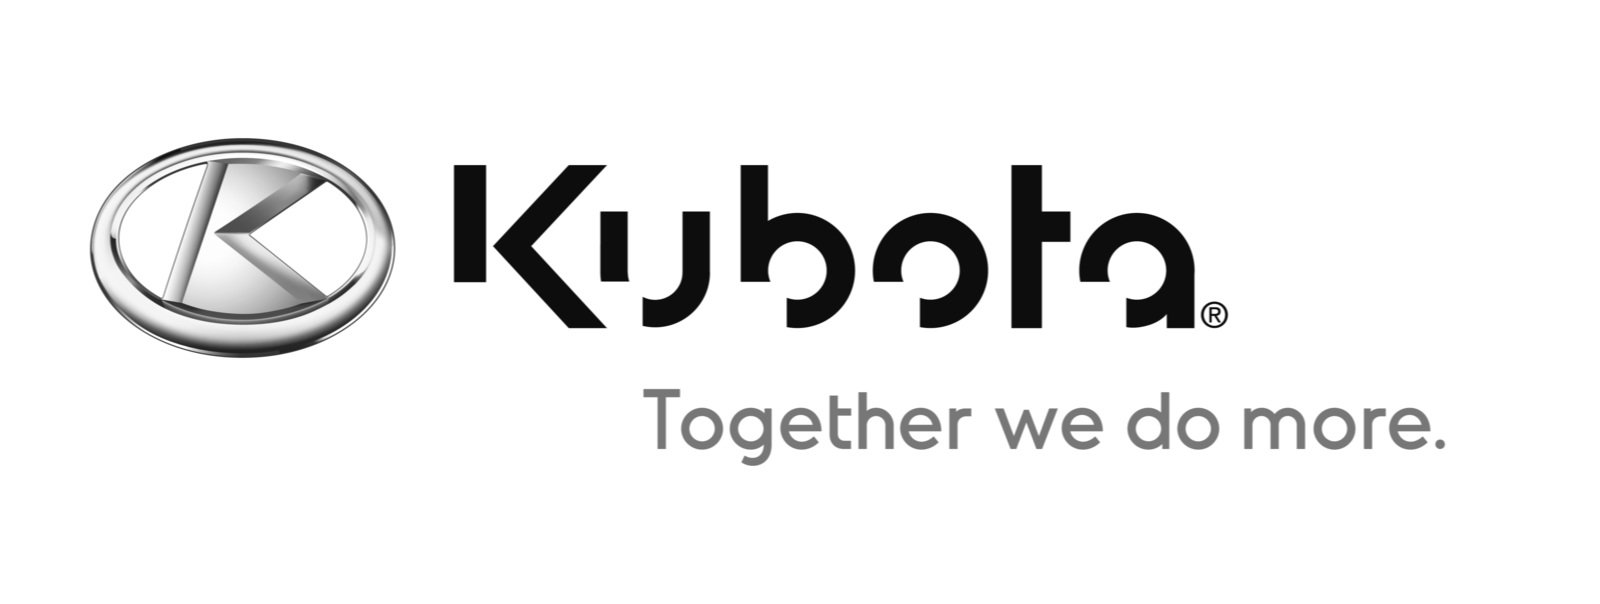 Commercial video production company logo of Kubota by Fragrant Film in Fort Worth, Texas